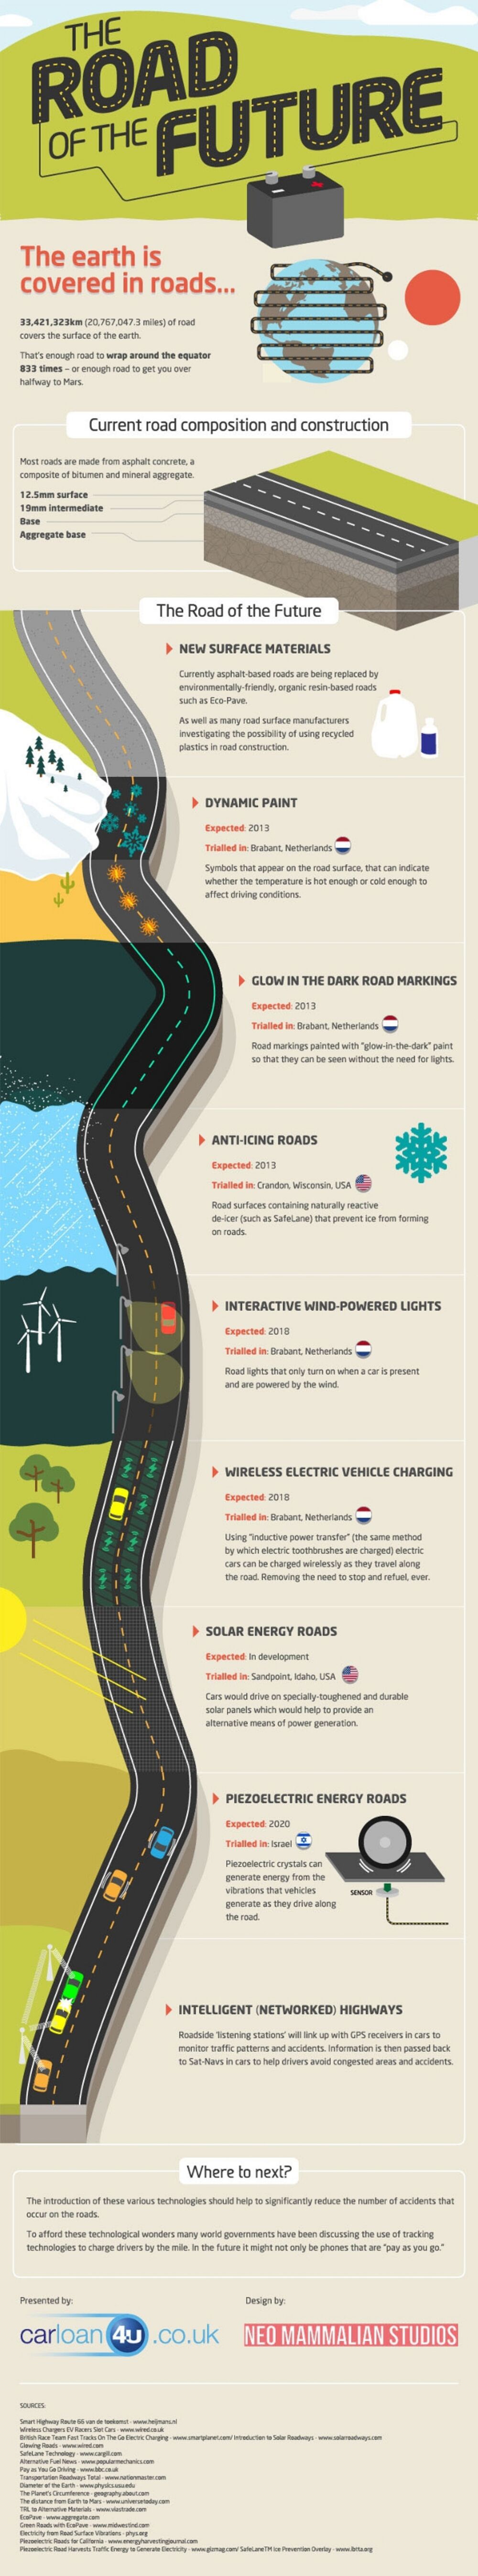 9 Technologies For Building The Road Of The Future Bloomberg